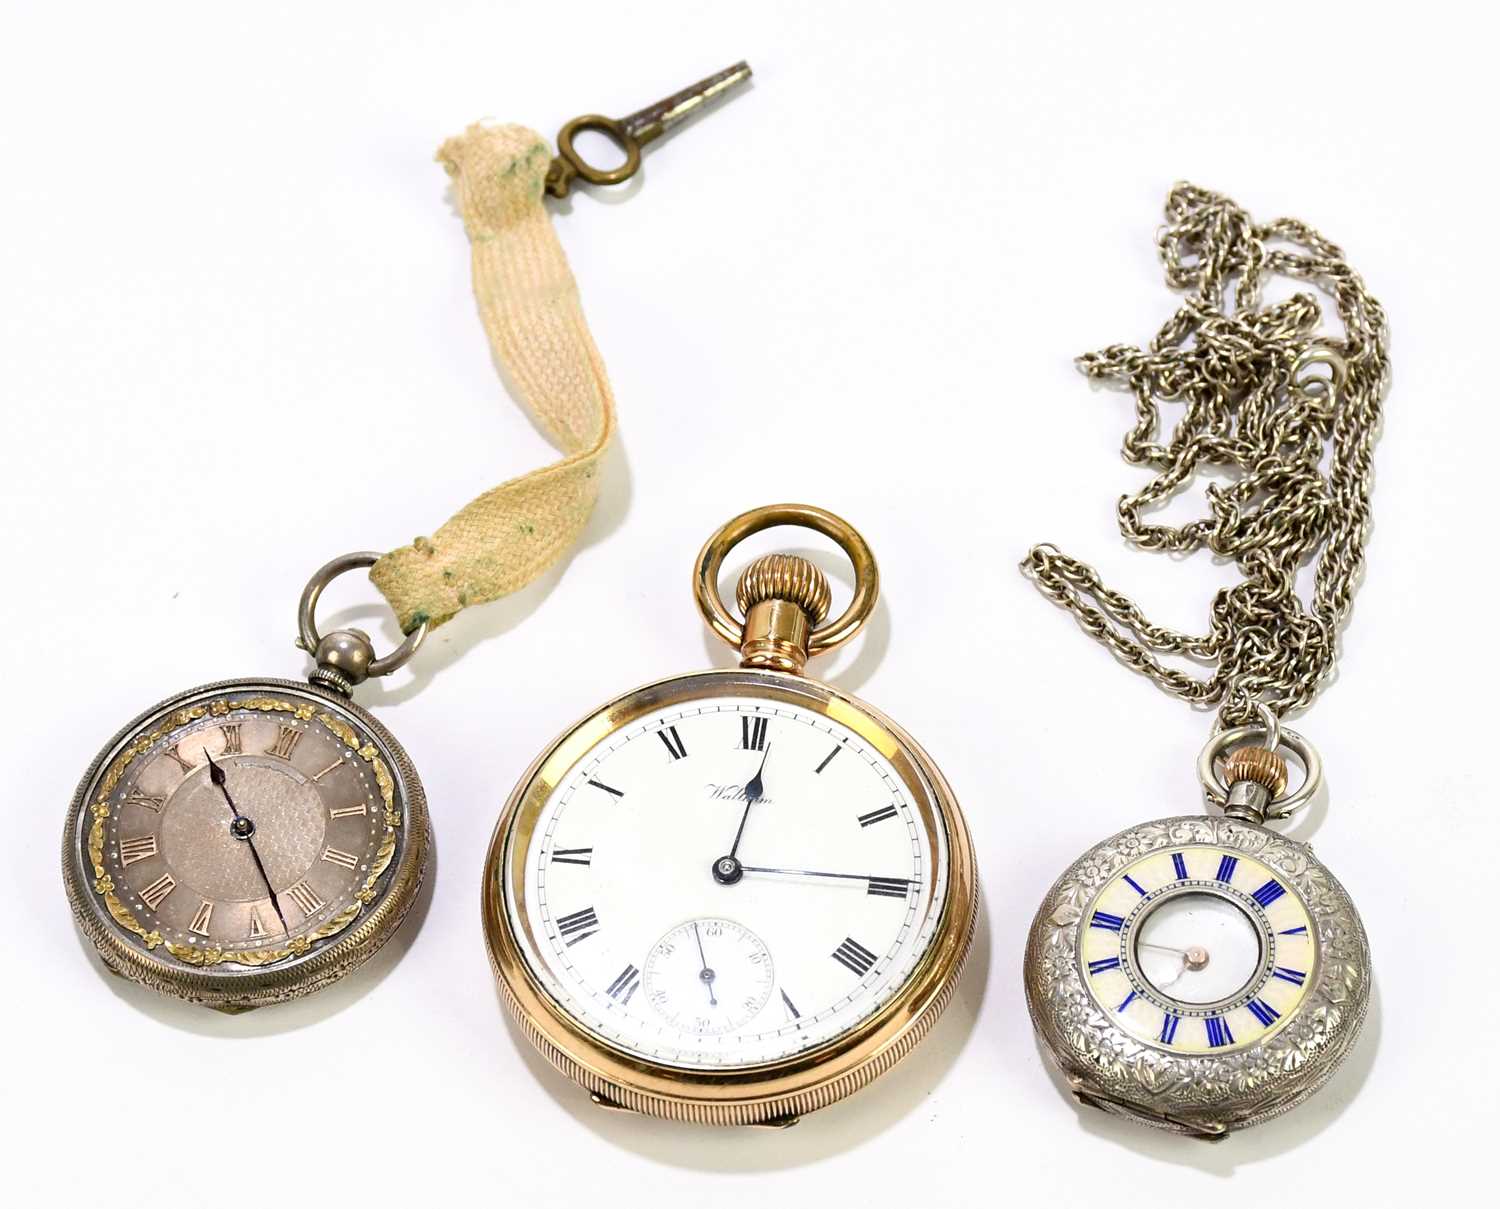 WALTHAM; a gold plated crown wind open faced pocket watch, the enamelled dial set with Roman